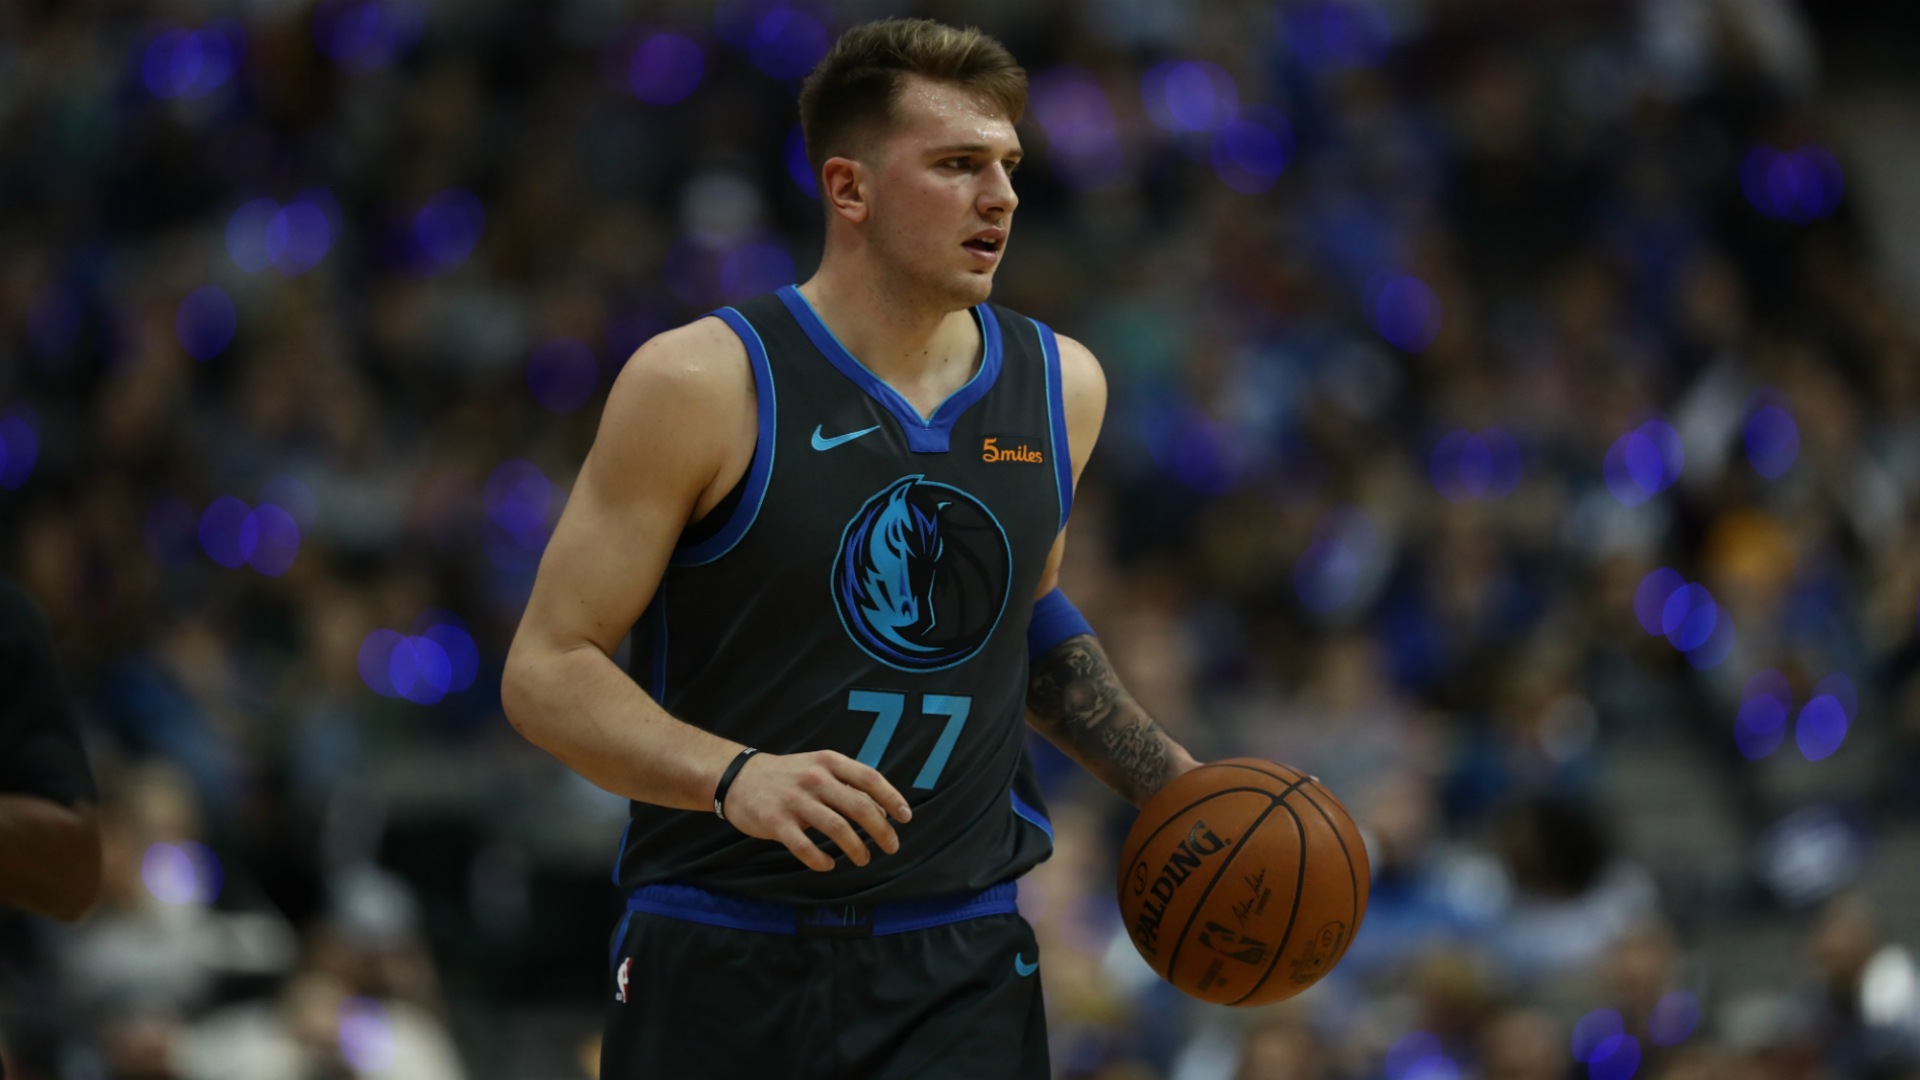 Deandre Ayton discussed the rise of NBA Rookie of the Year favourite Luka Doncic.